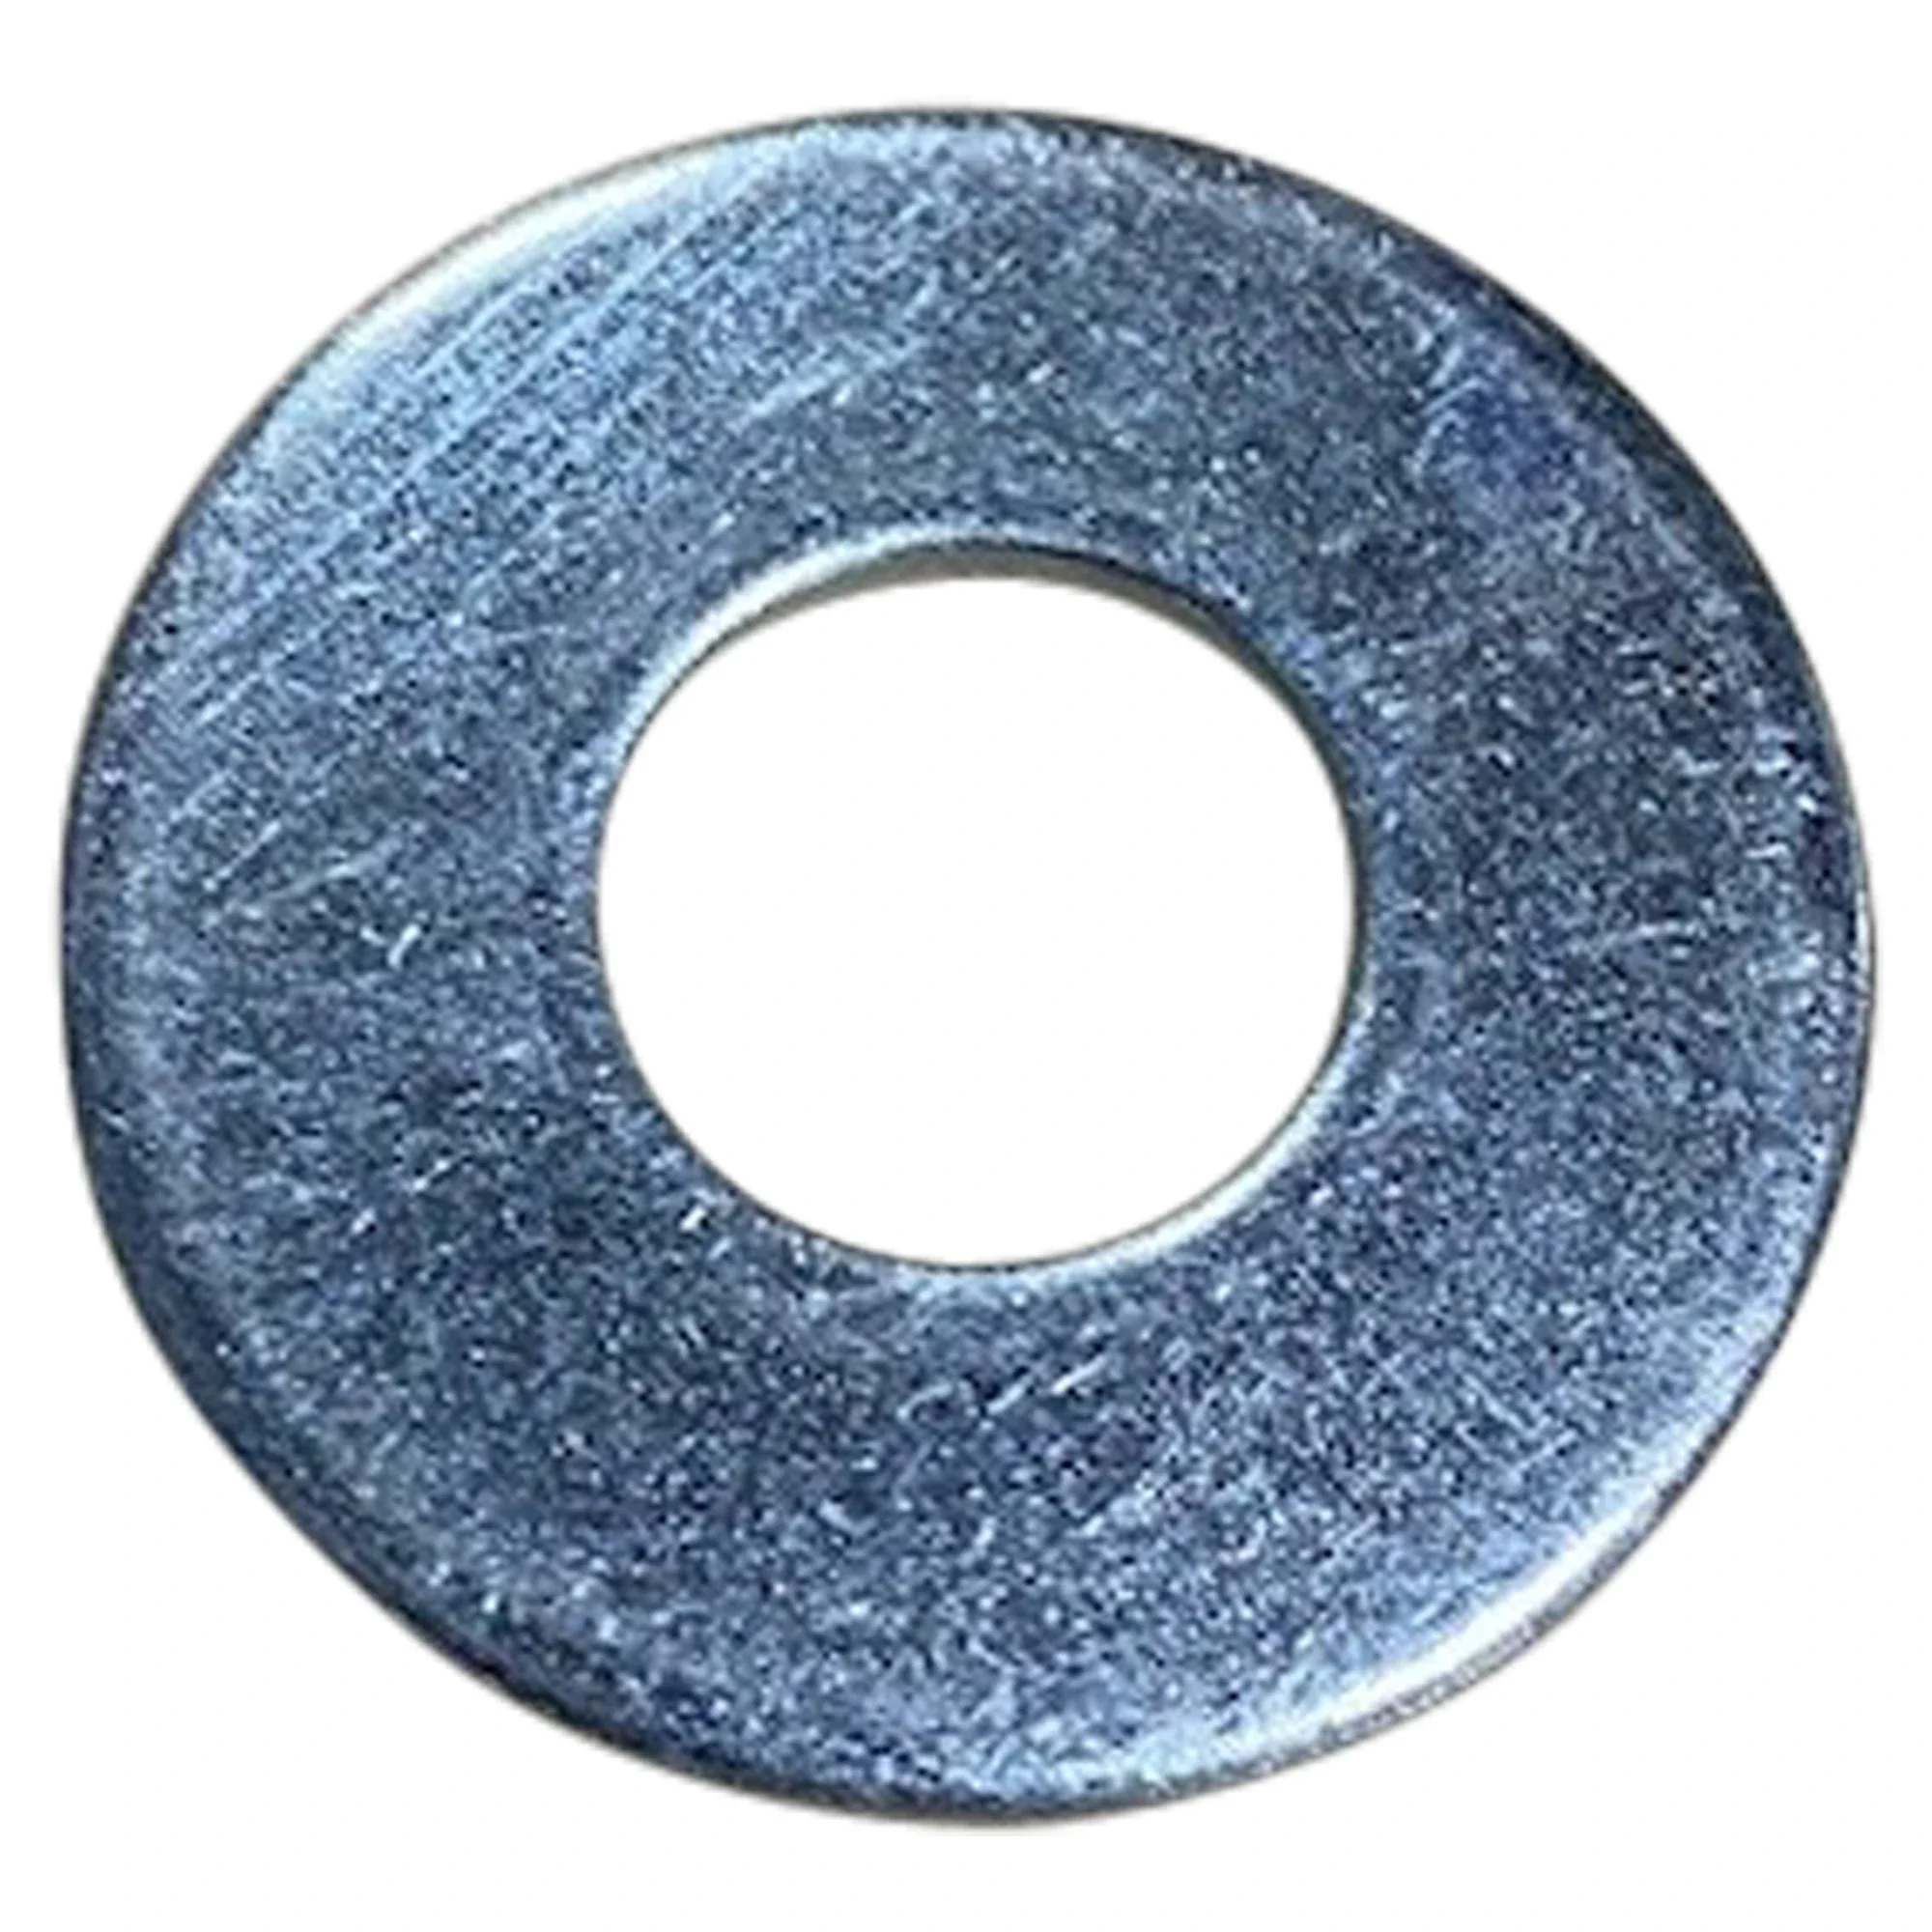 Wastebuilt® Replacement for Leach Fender Washer 3/4